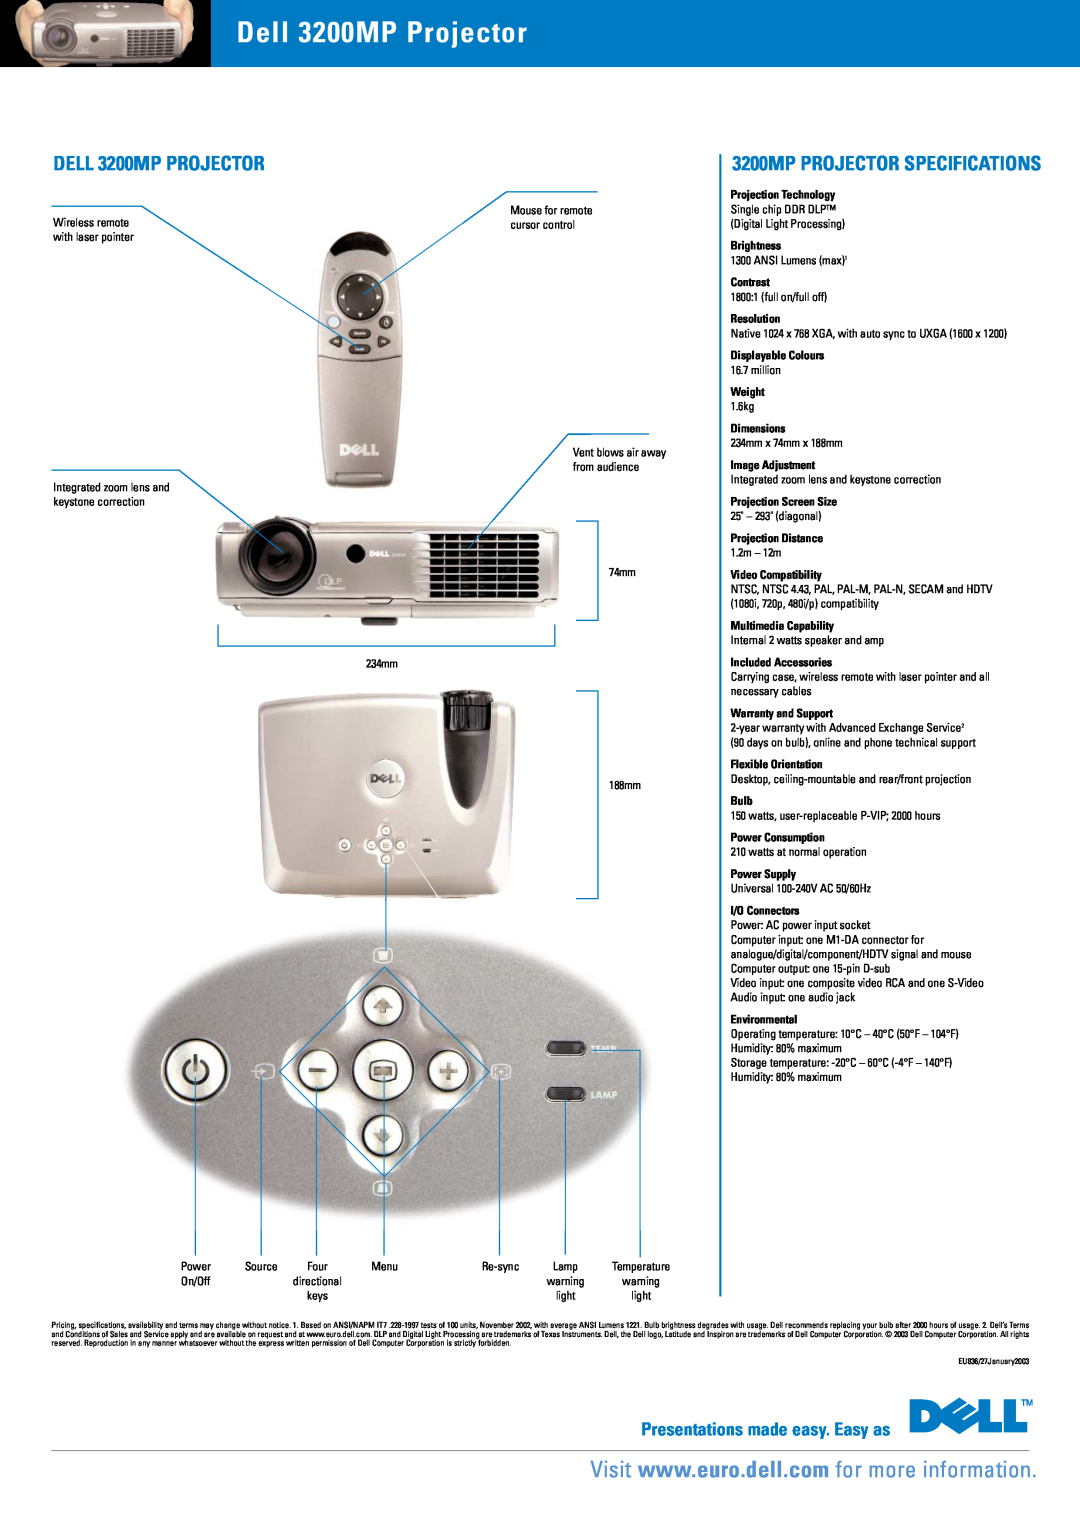 Dell 3200MP PROJECTOR SPECIFICATIONS, Dell 3200MP Projector, DELL 3200MP PROJECTOR, Presentations made easy. Easy as 